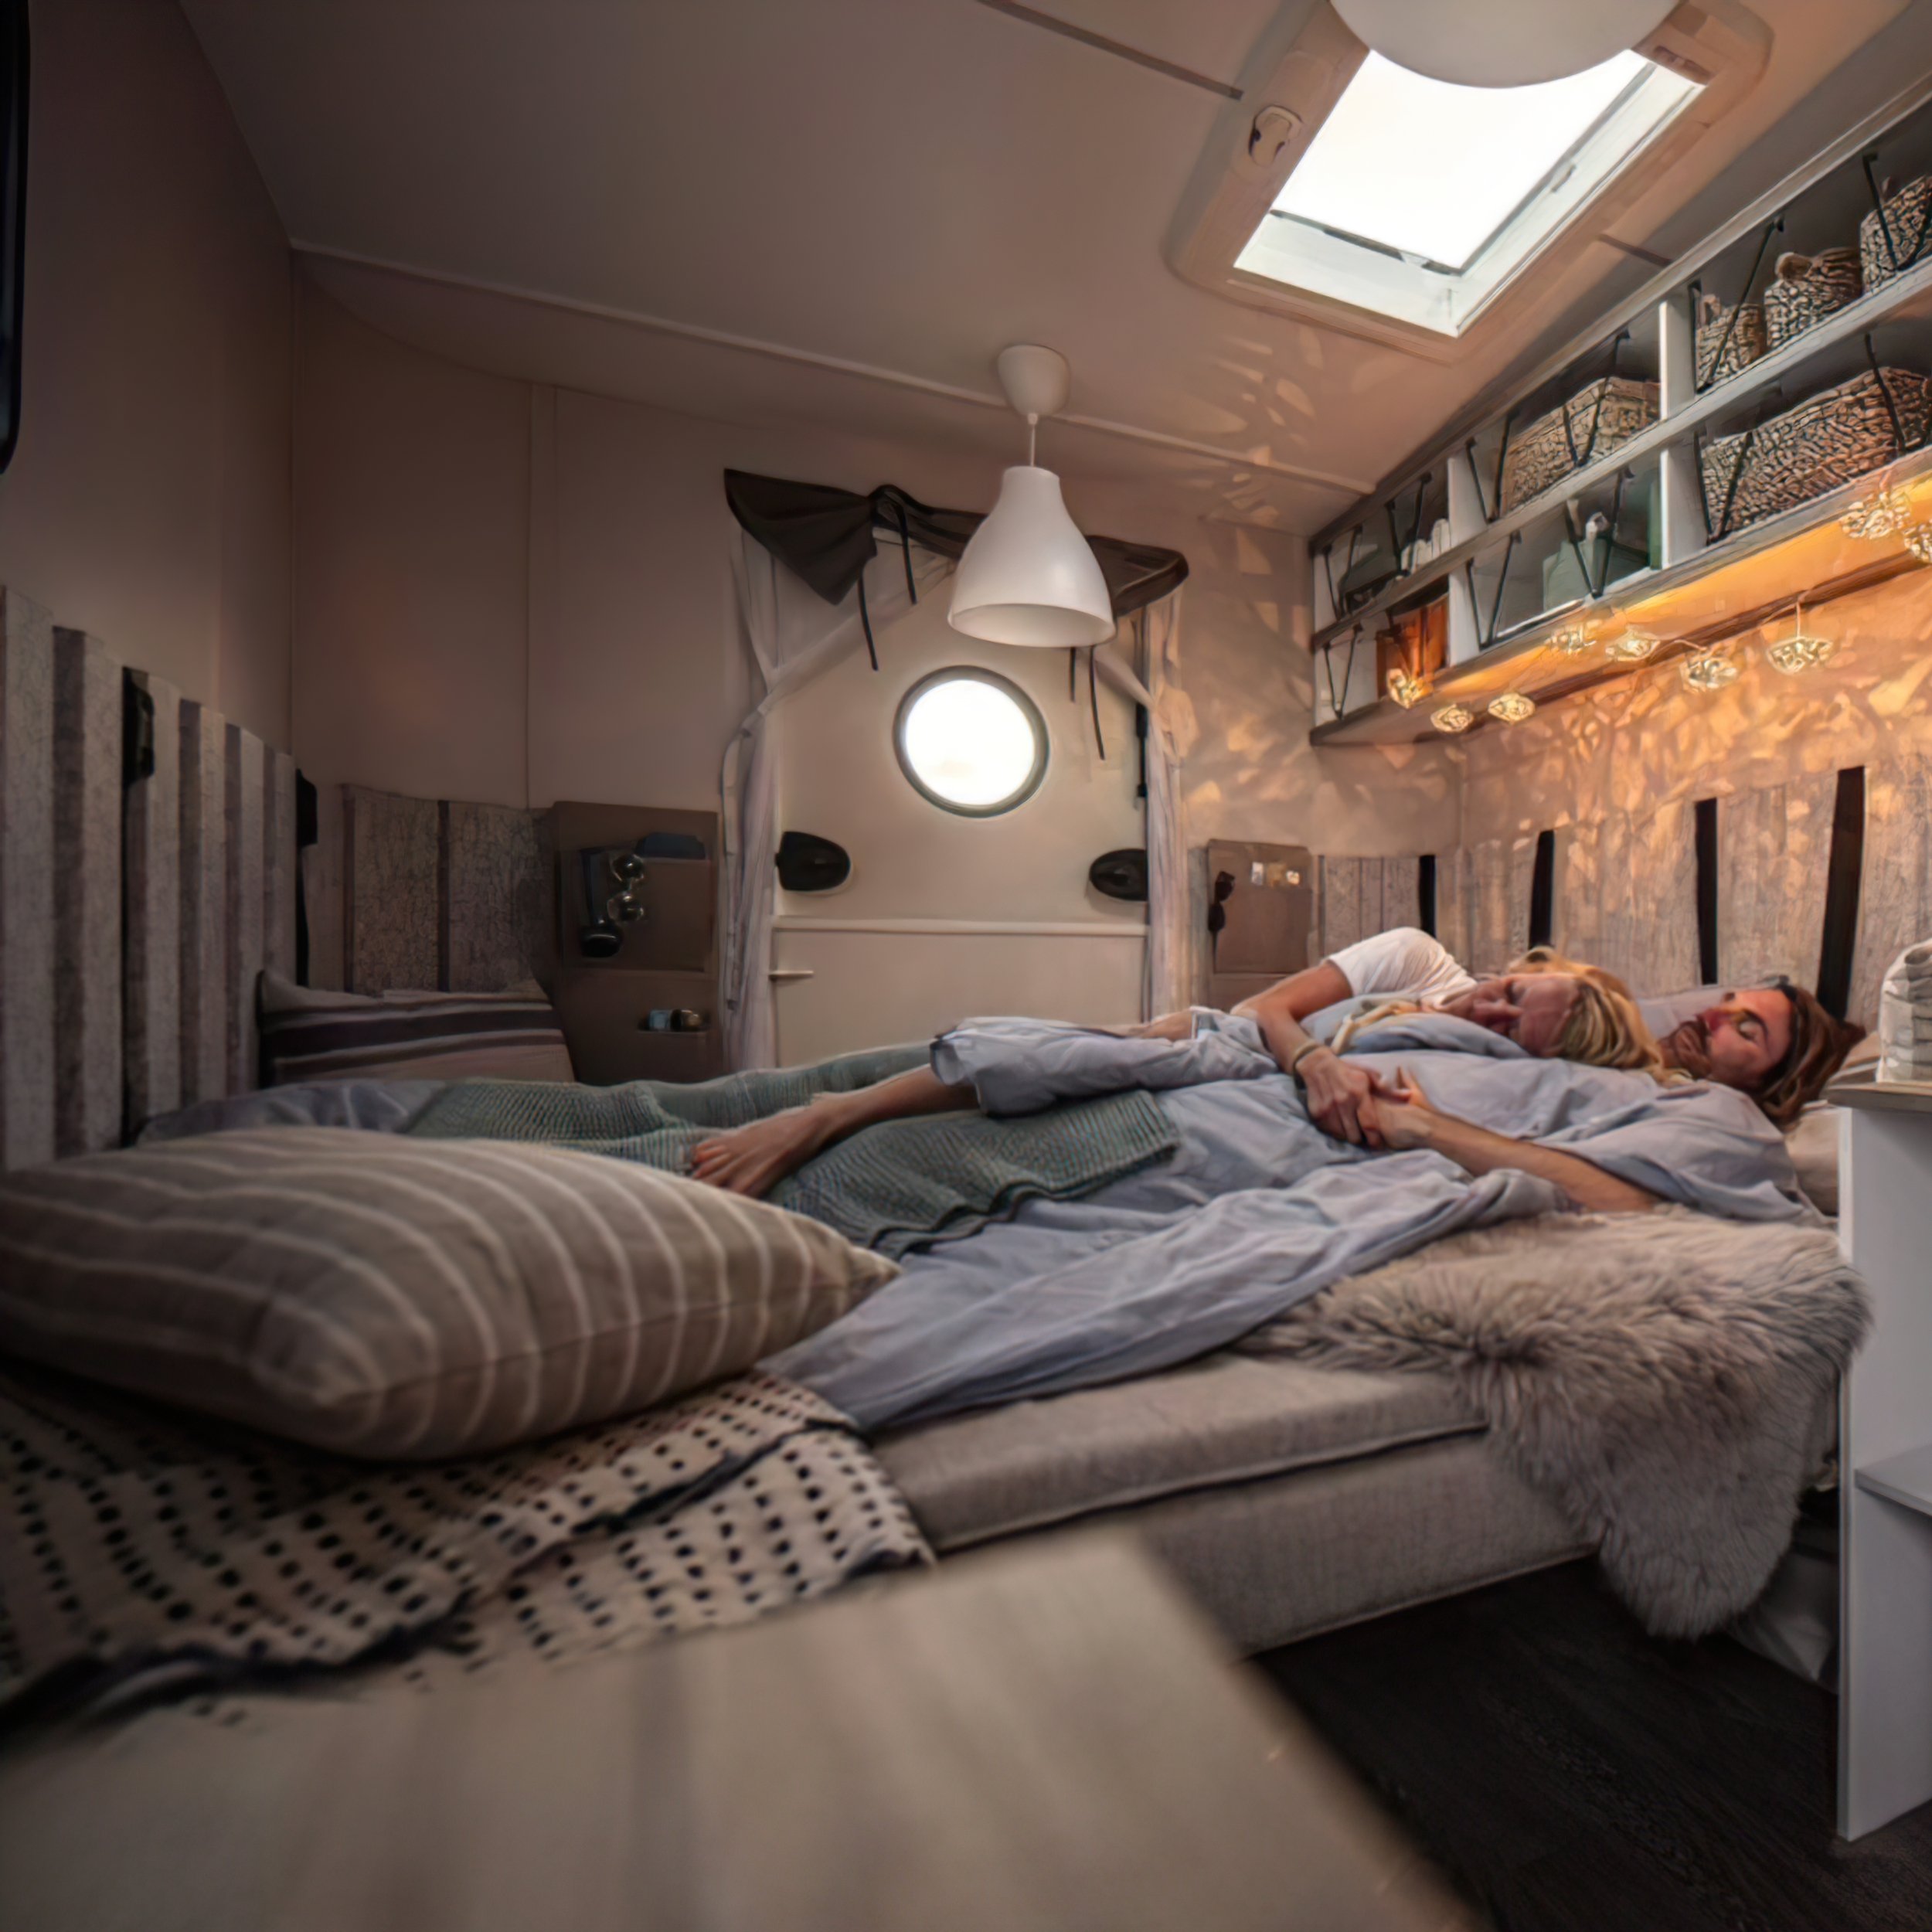  The single-axle camper comes in three models of increasing size, the 360 and 420, which can sleep two adults and one child, and the premium Beachy 450, which sleeps up to a family of four! The main difference between the three models comes down to f